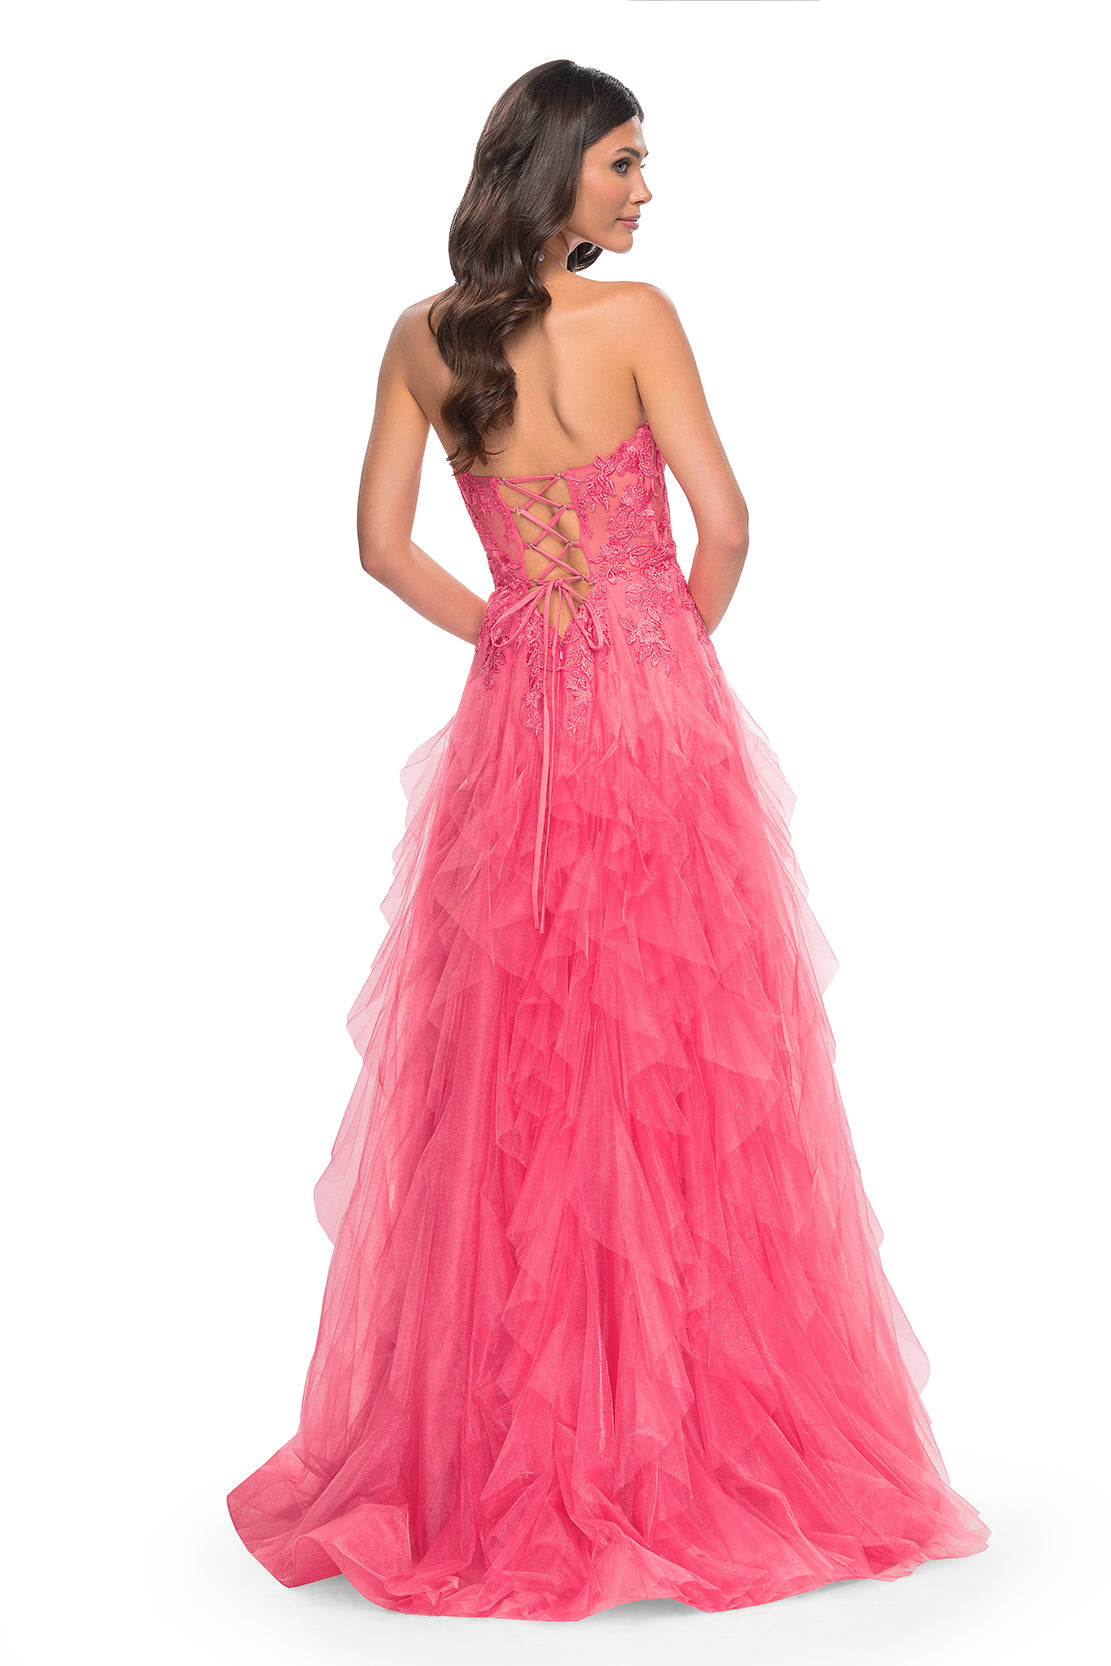 La Femme 32286 Illusion Lace Bustier A-Line Prom Gown - A captivating A-line gown featuring a ruffle tulle skirt, high slit, and illusion lace bustier bodice for a glamorous and sophisticated prom look. The model is wearing the dress in the color coral.